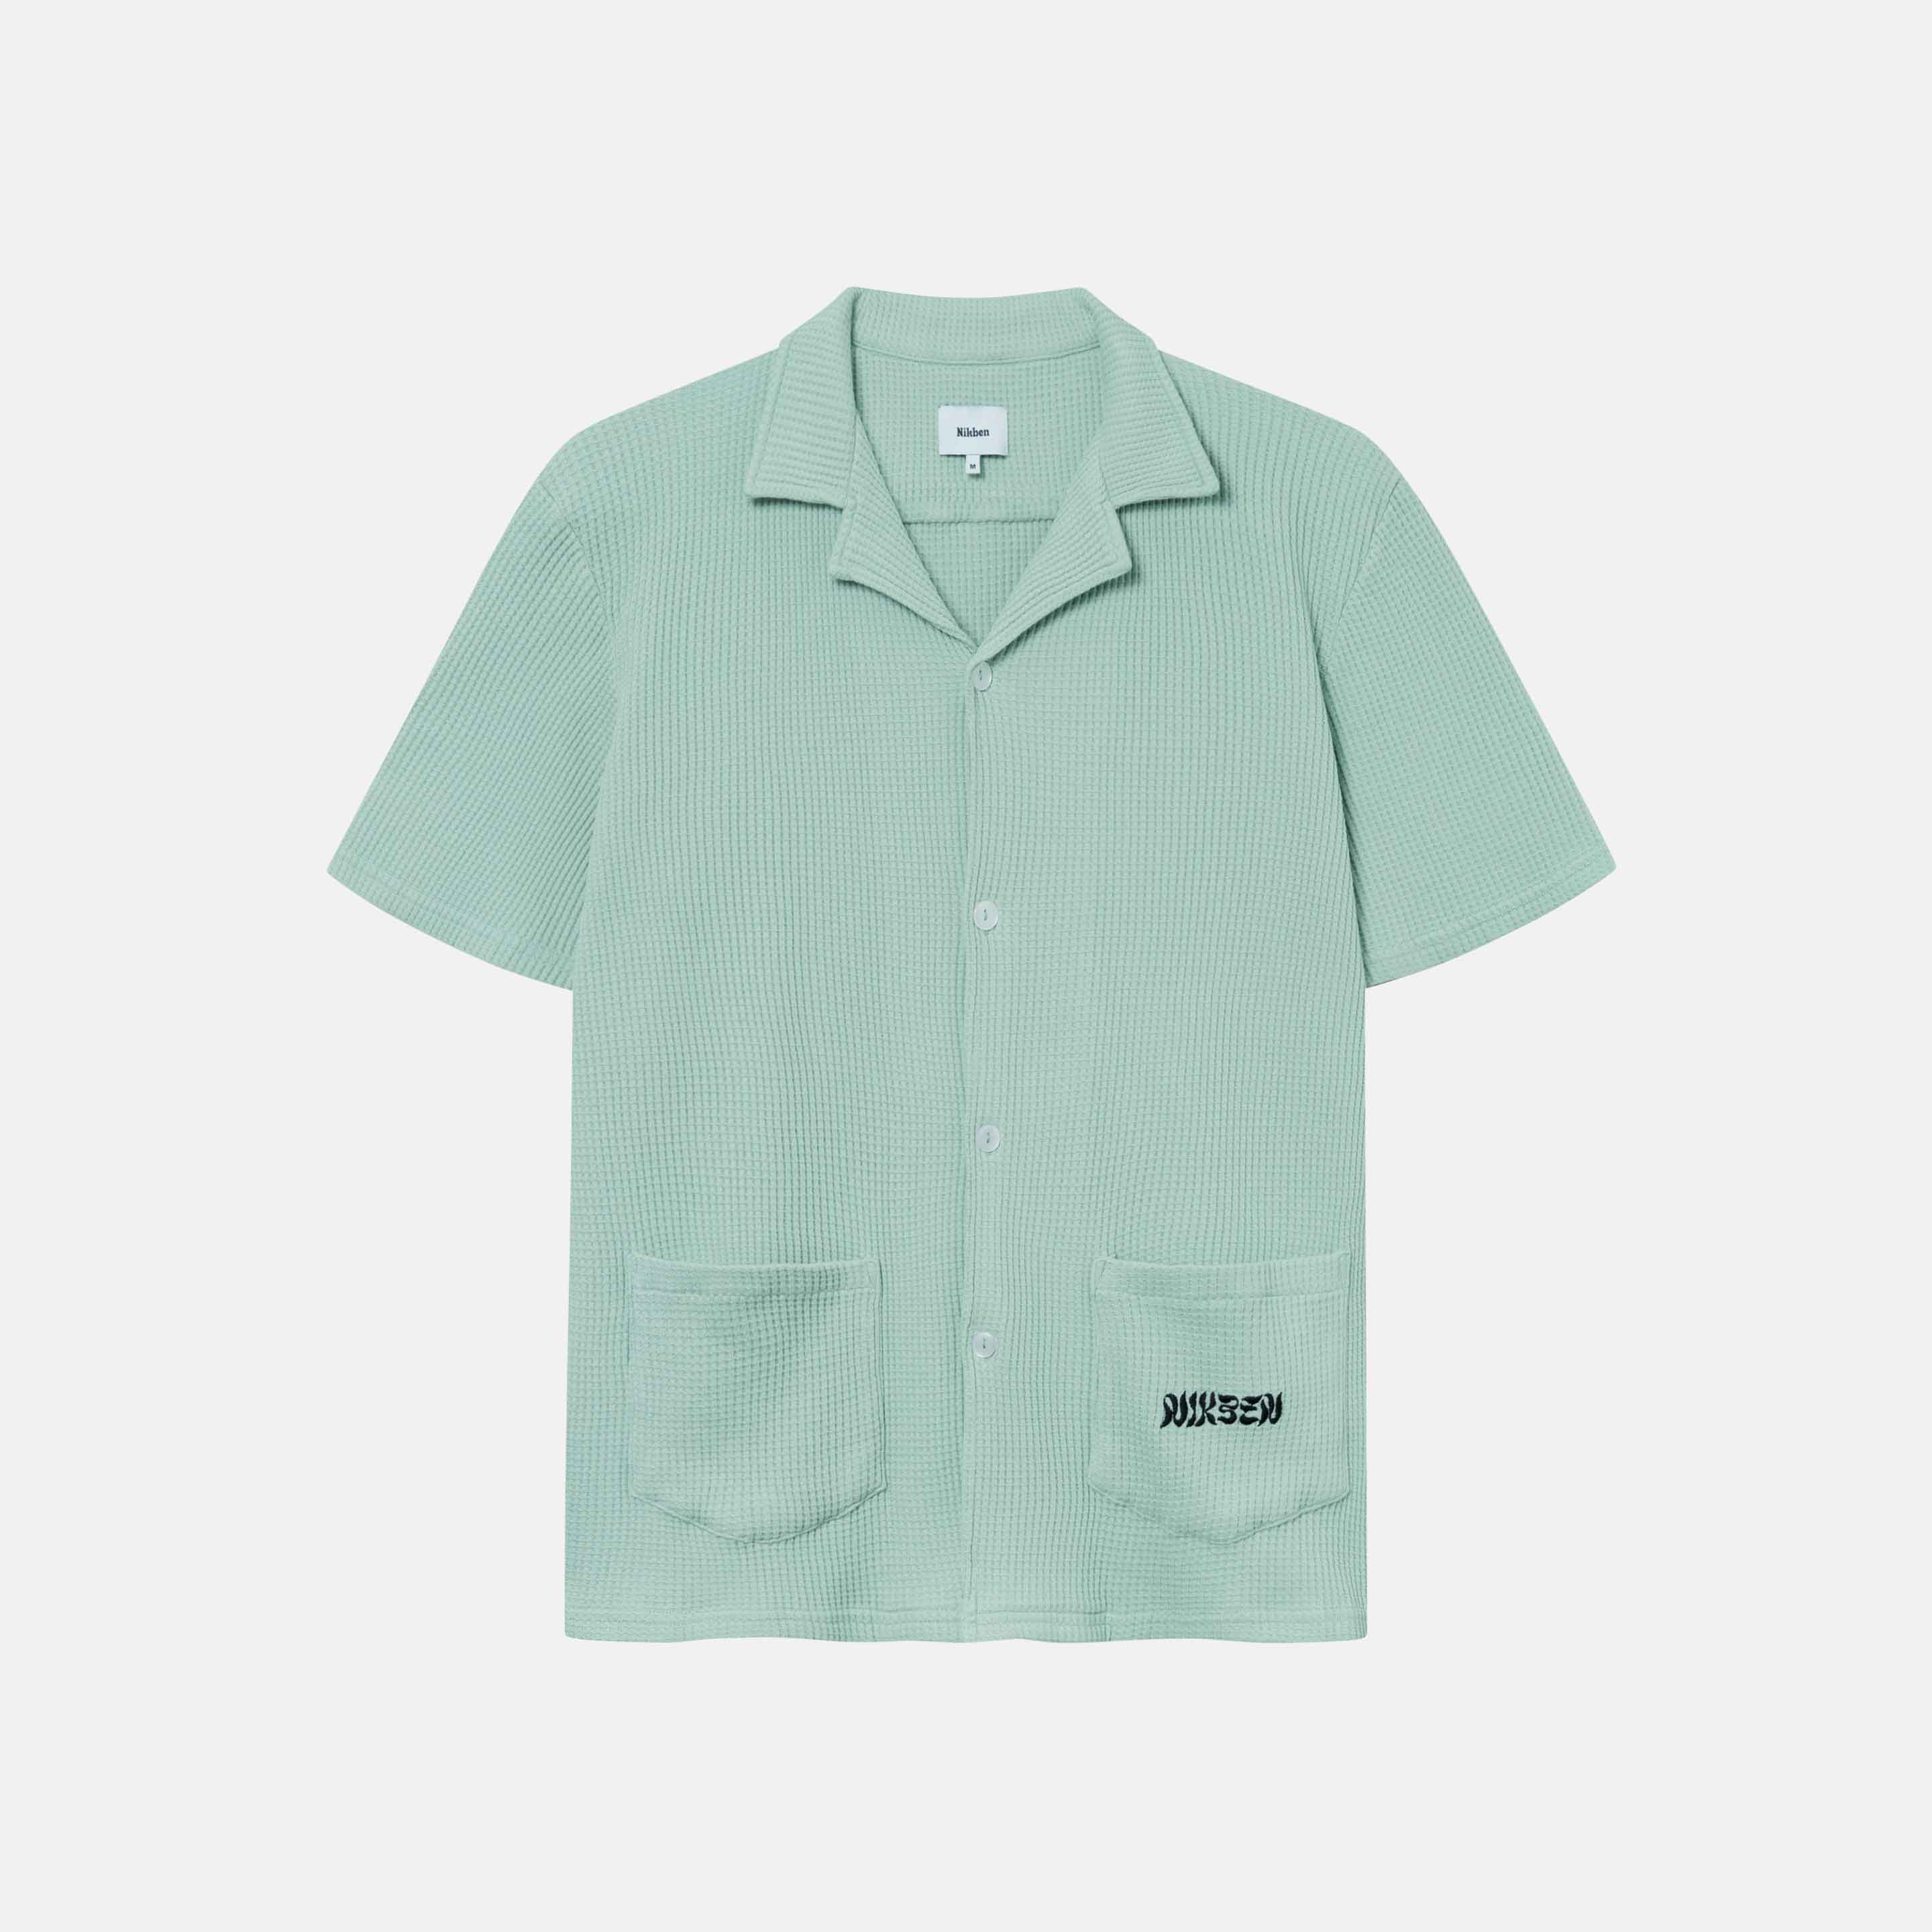 Mint green waffle-patterned short-sleeved shirt with two front pockets, featuring a stitched black Nikben logo on the left pocket and button closure.